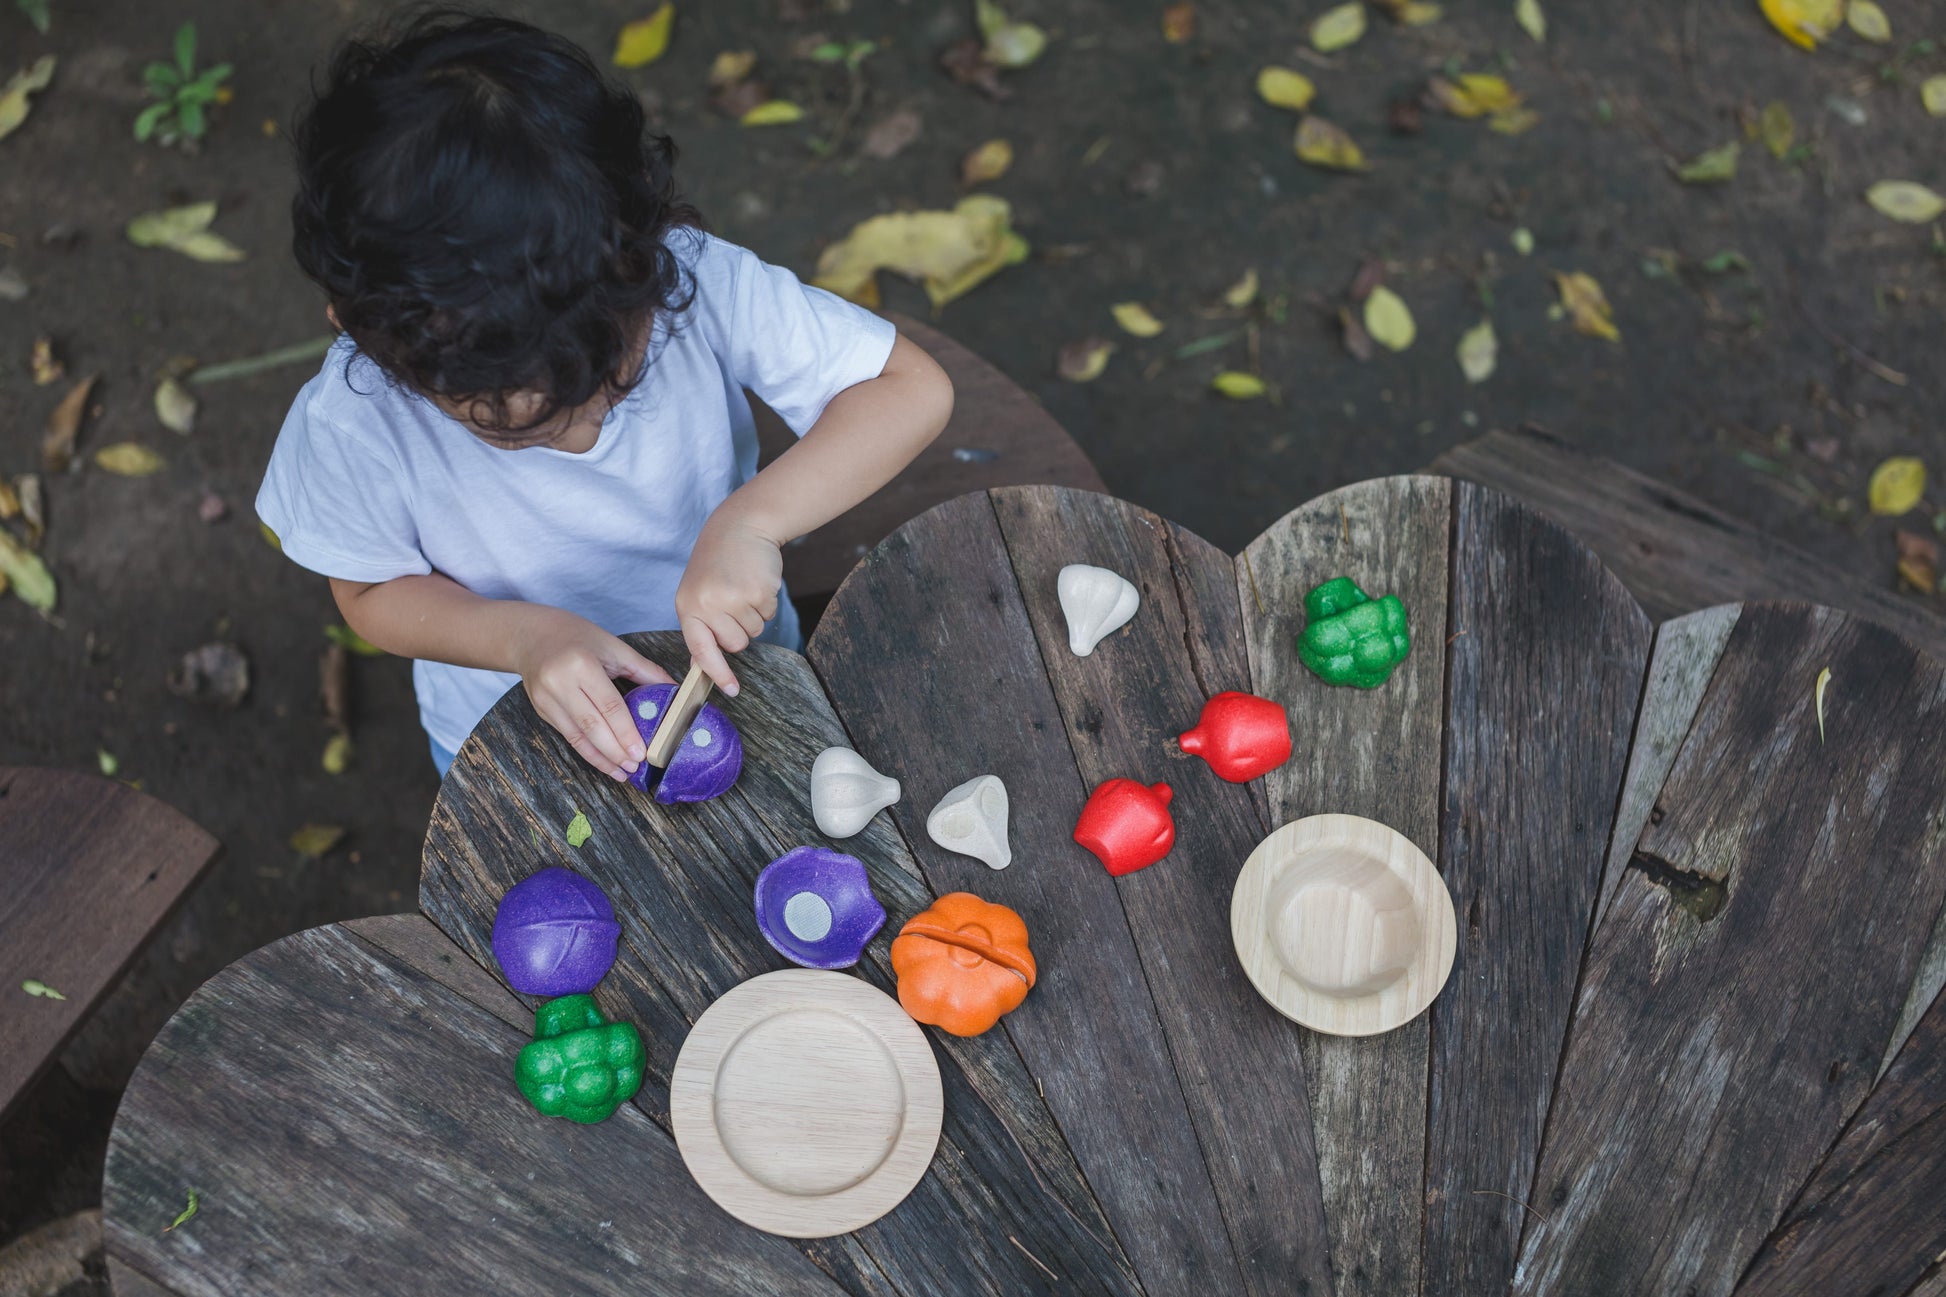 A child playing with a set of colorful wooden vegetables and wooden plates on a woo table